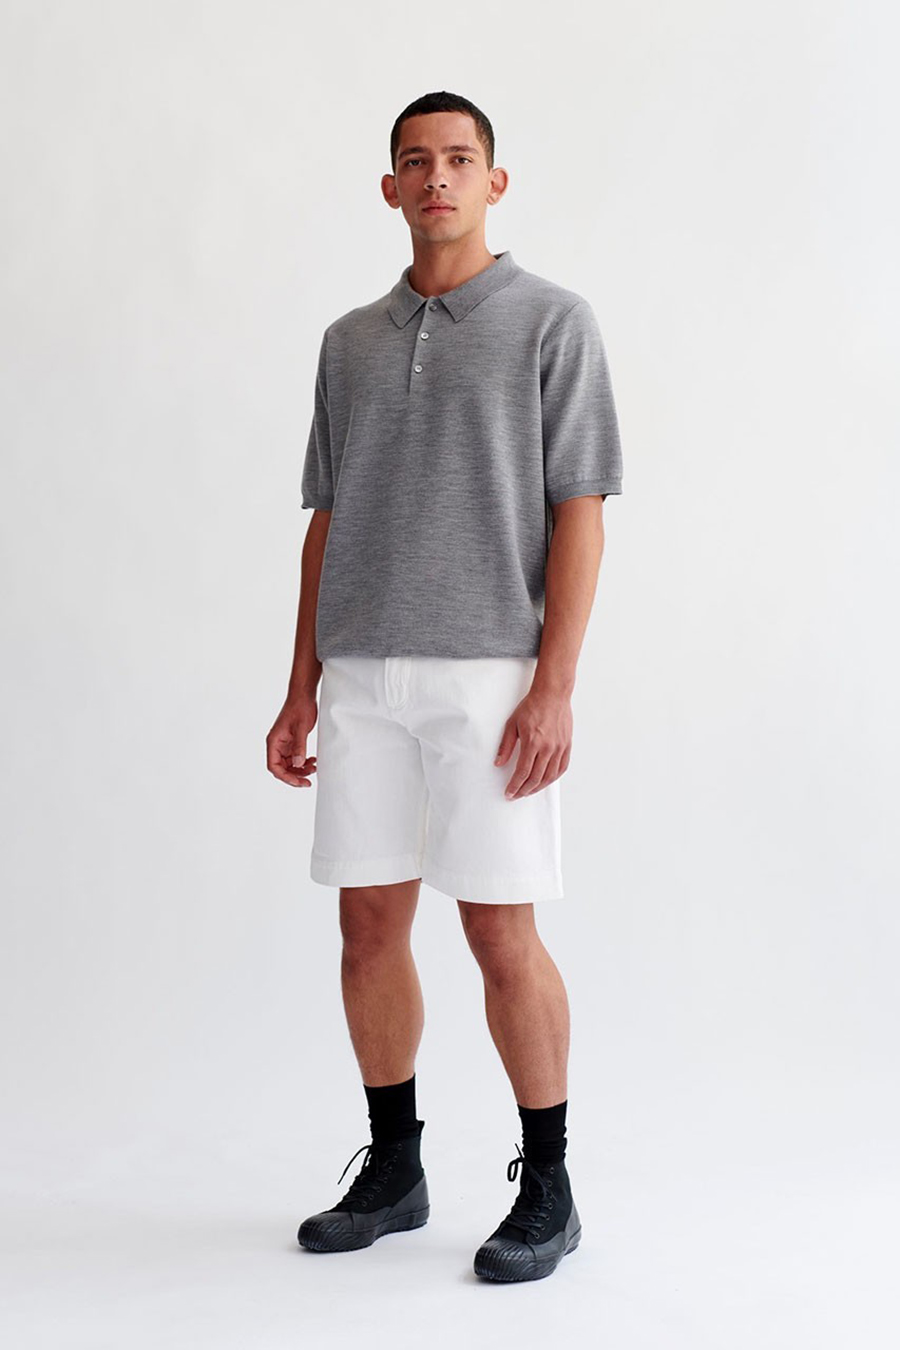 Wearing a gray polo, white shorts, and black high top sneakers